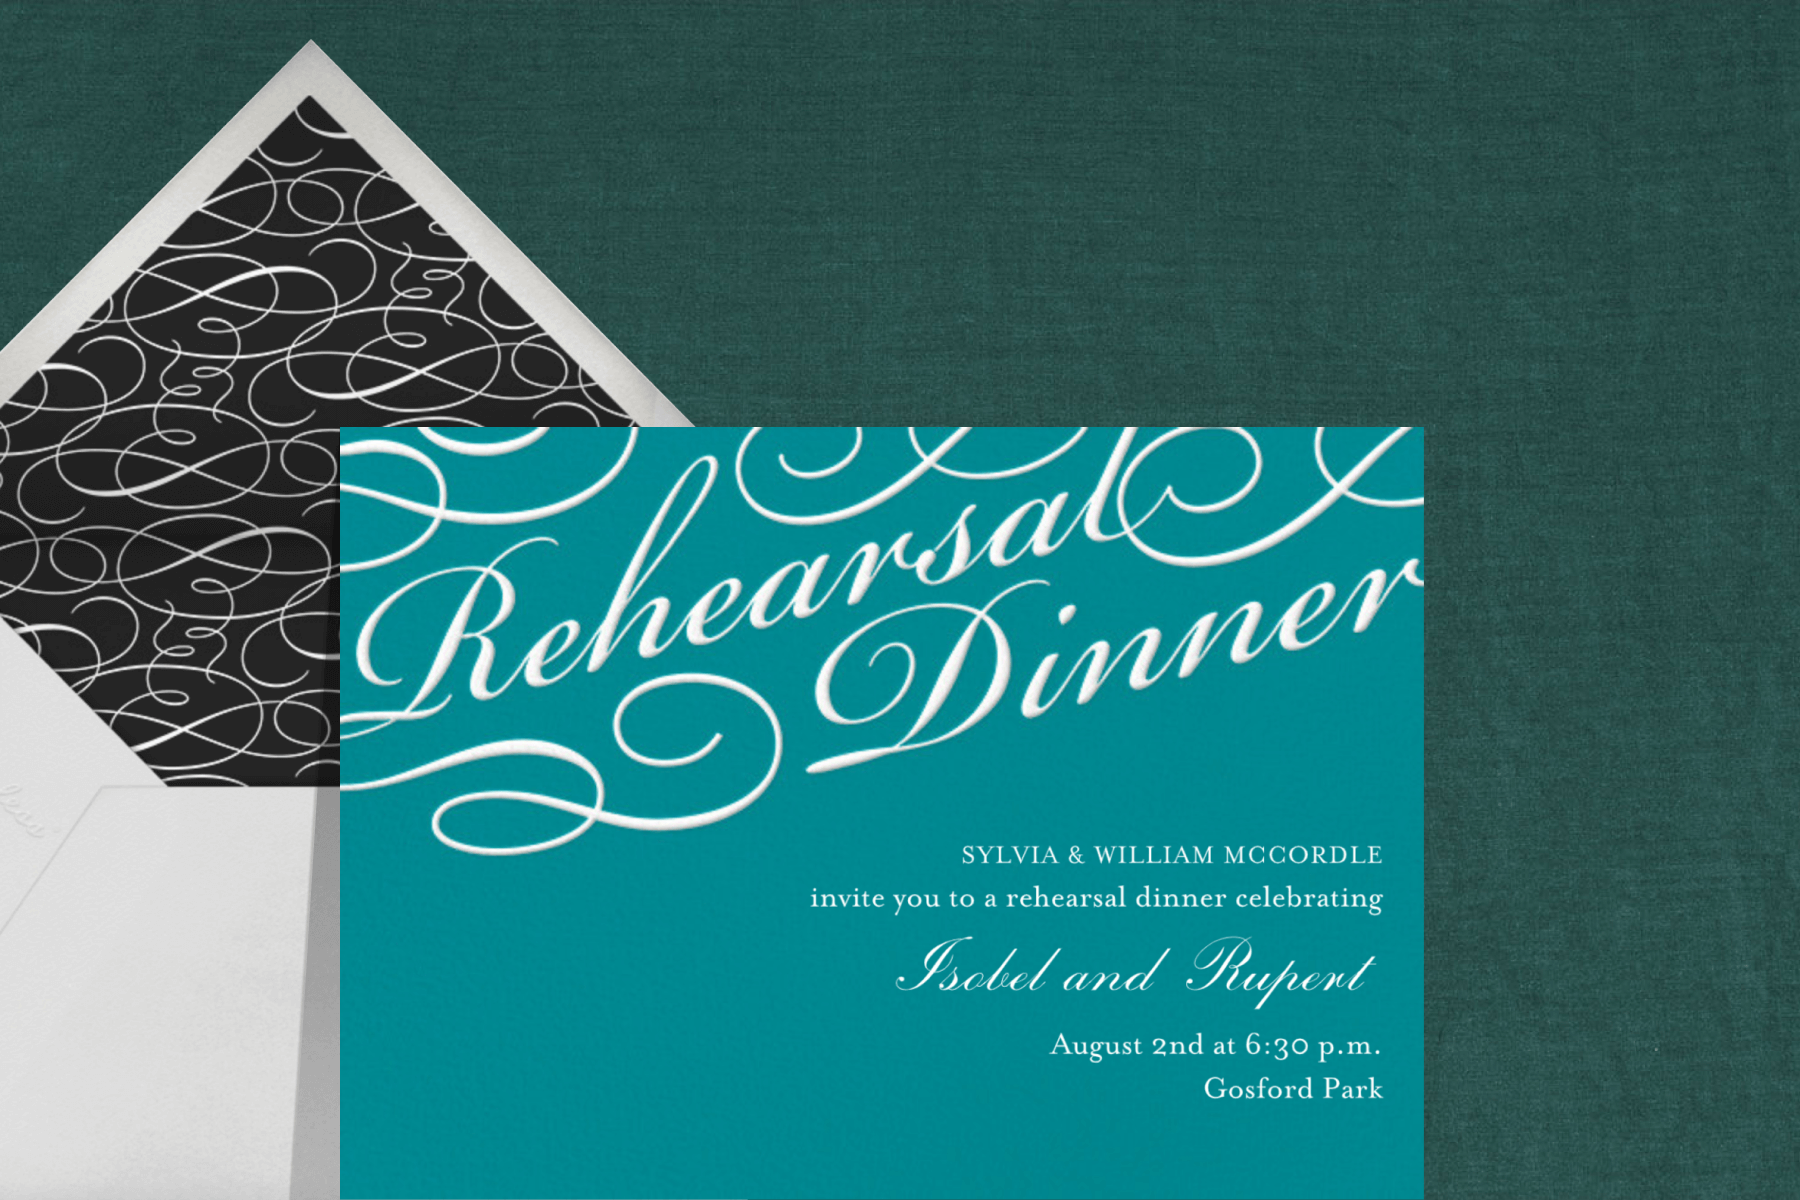 A rehearsal dinner invitation with white script on a turquoise background.